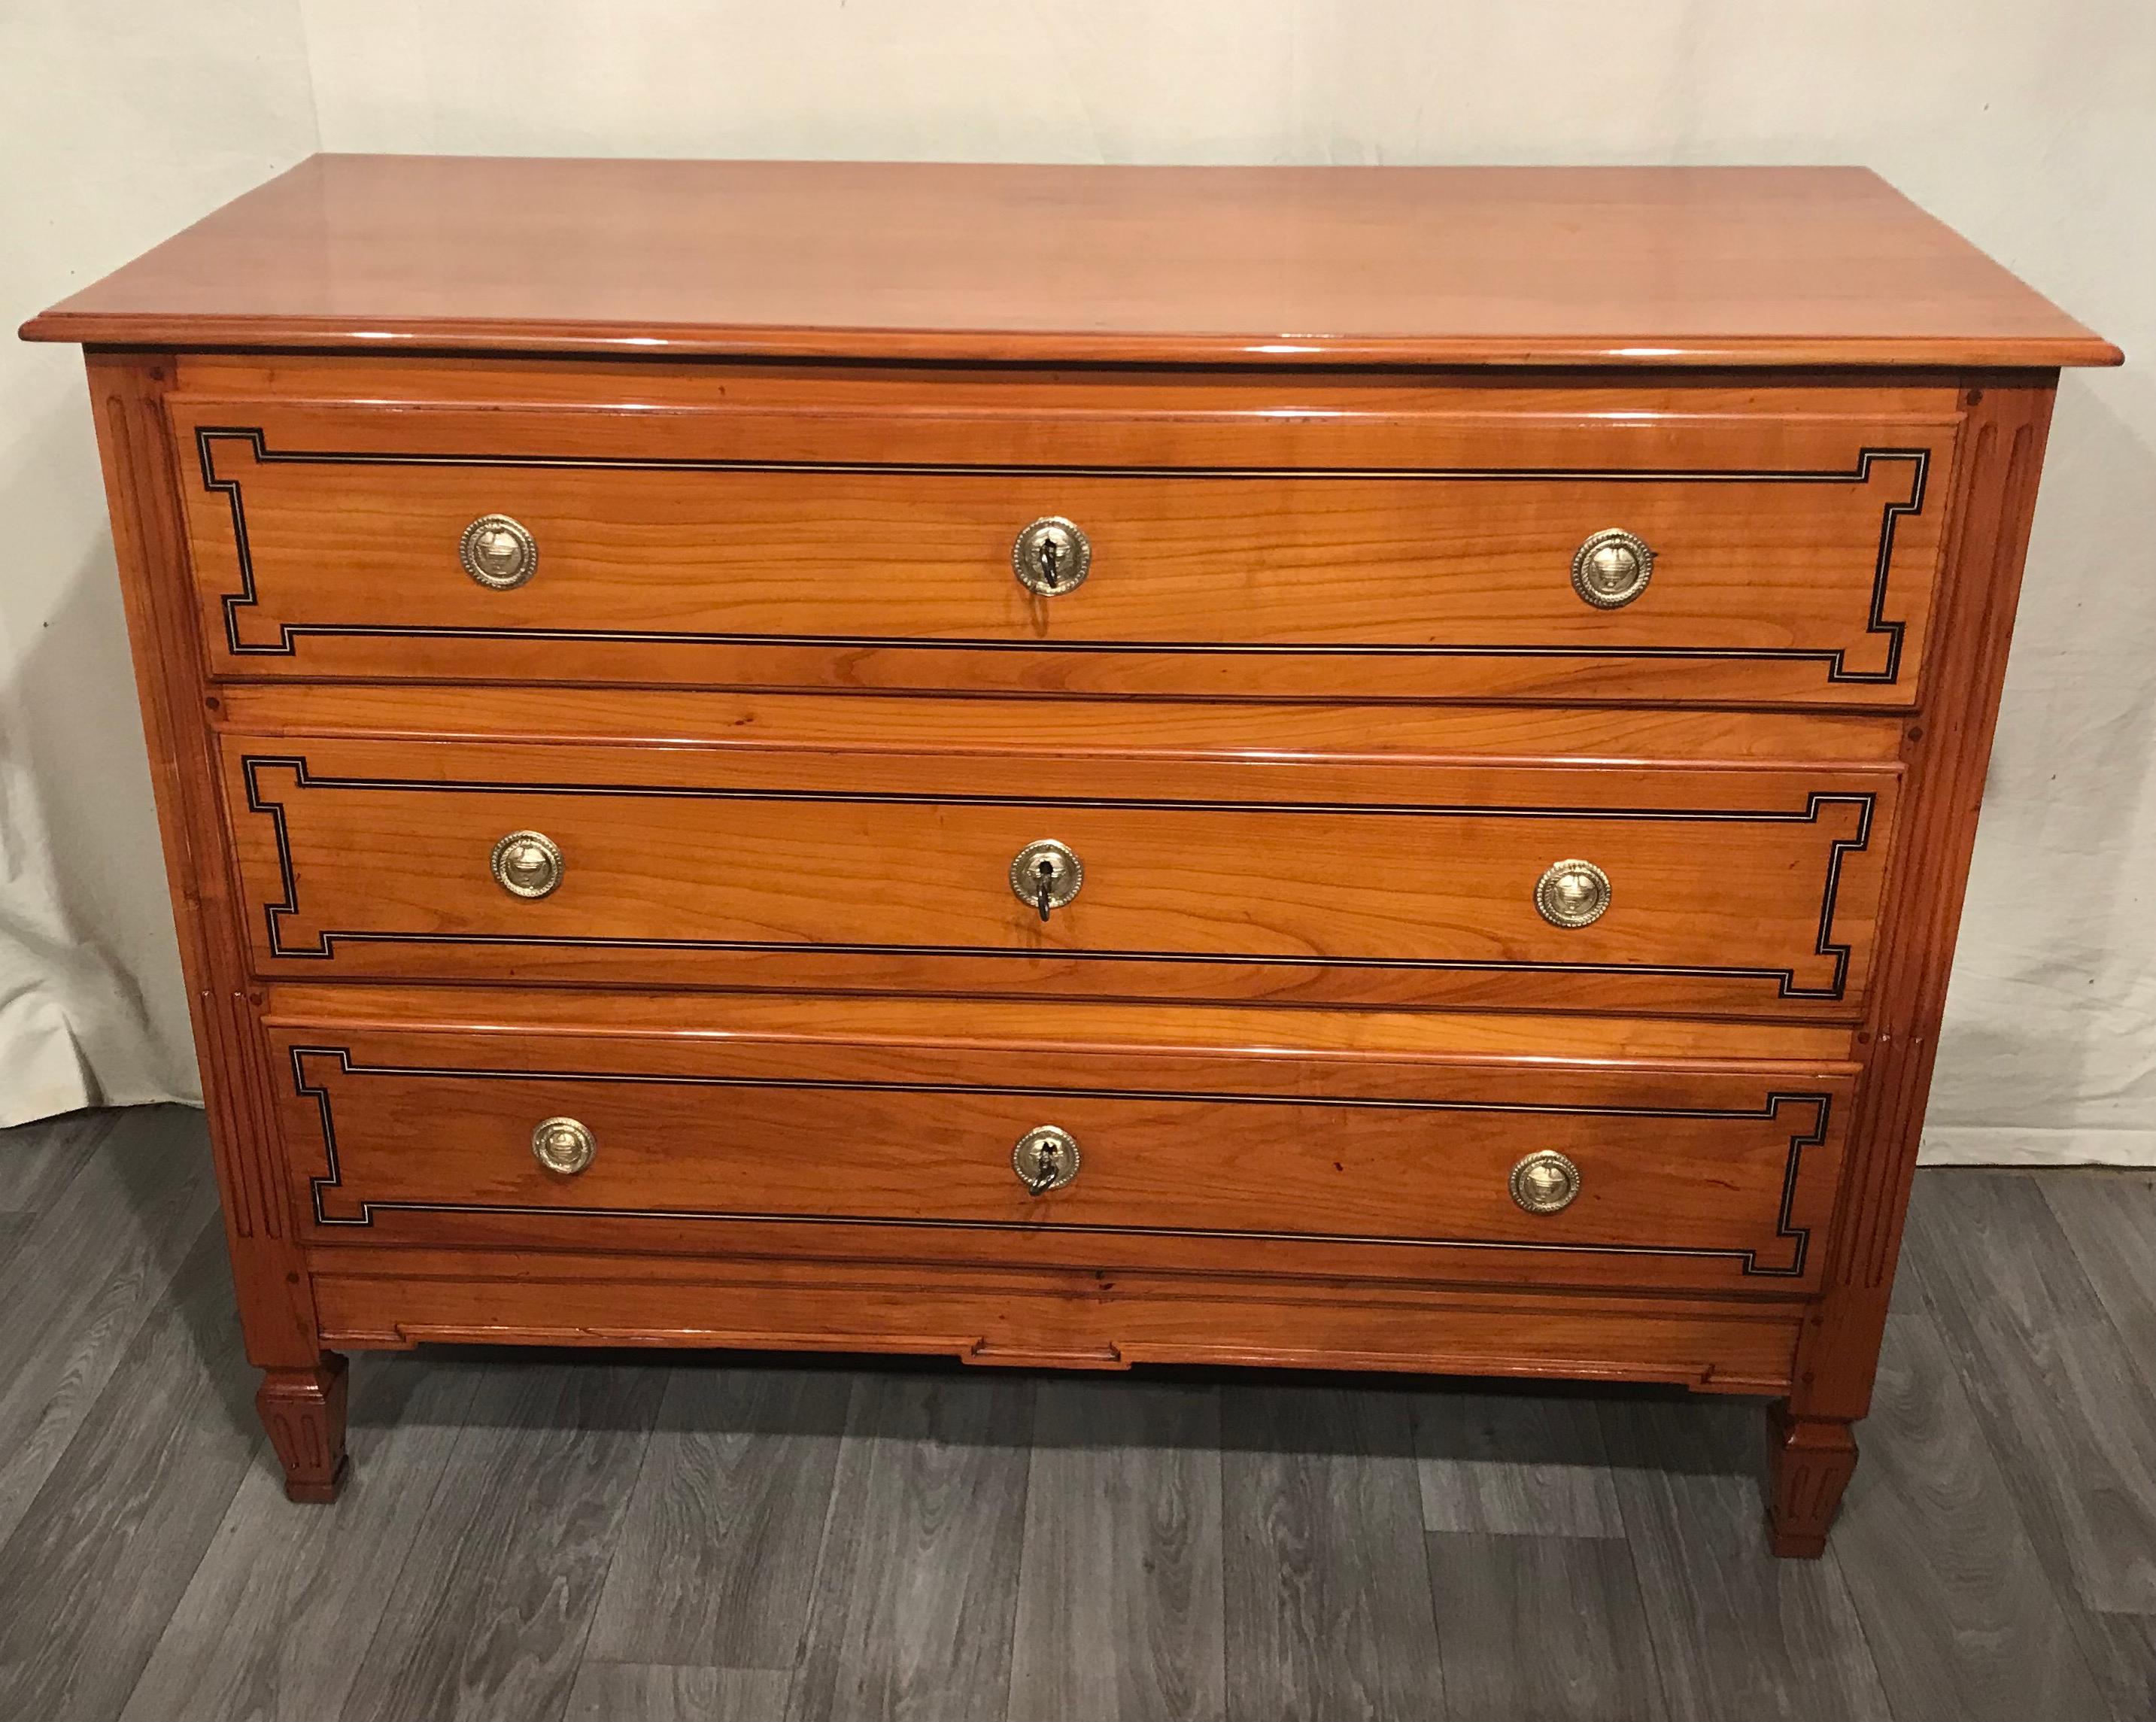 This original French Louis XVI Chest of Drawers dates back to around 1800. The three drawer commode has a sleek design and stands on four square fluted feet. The fluted decor continues on the front corners of the chest. The dresser has very pretty